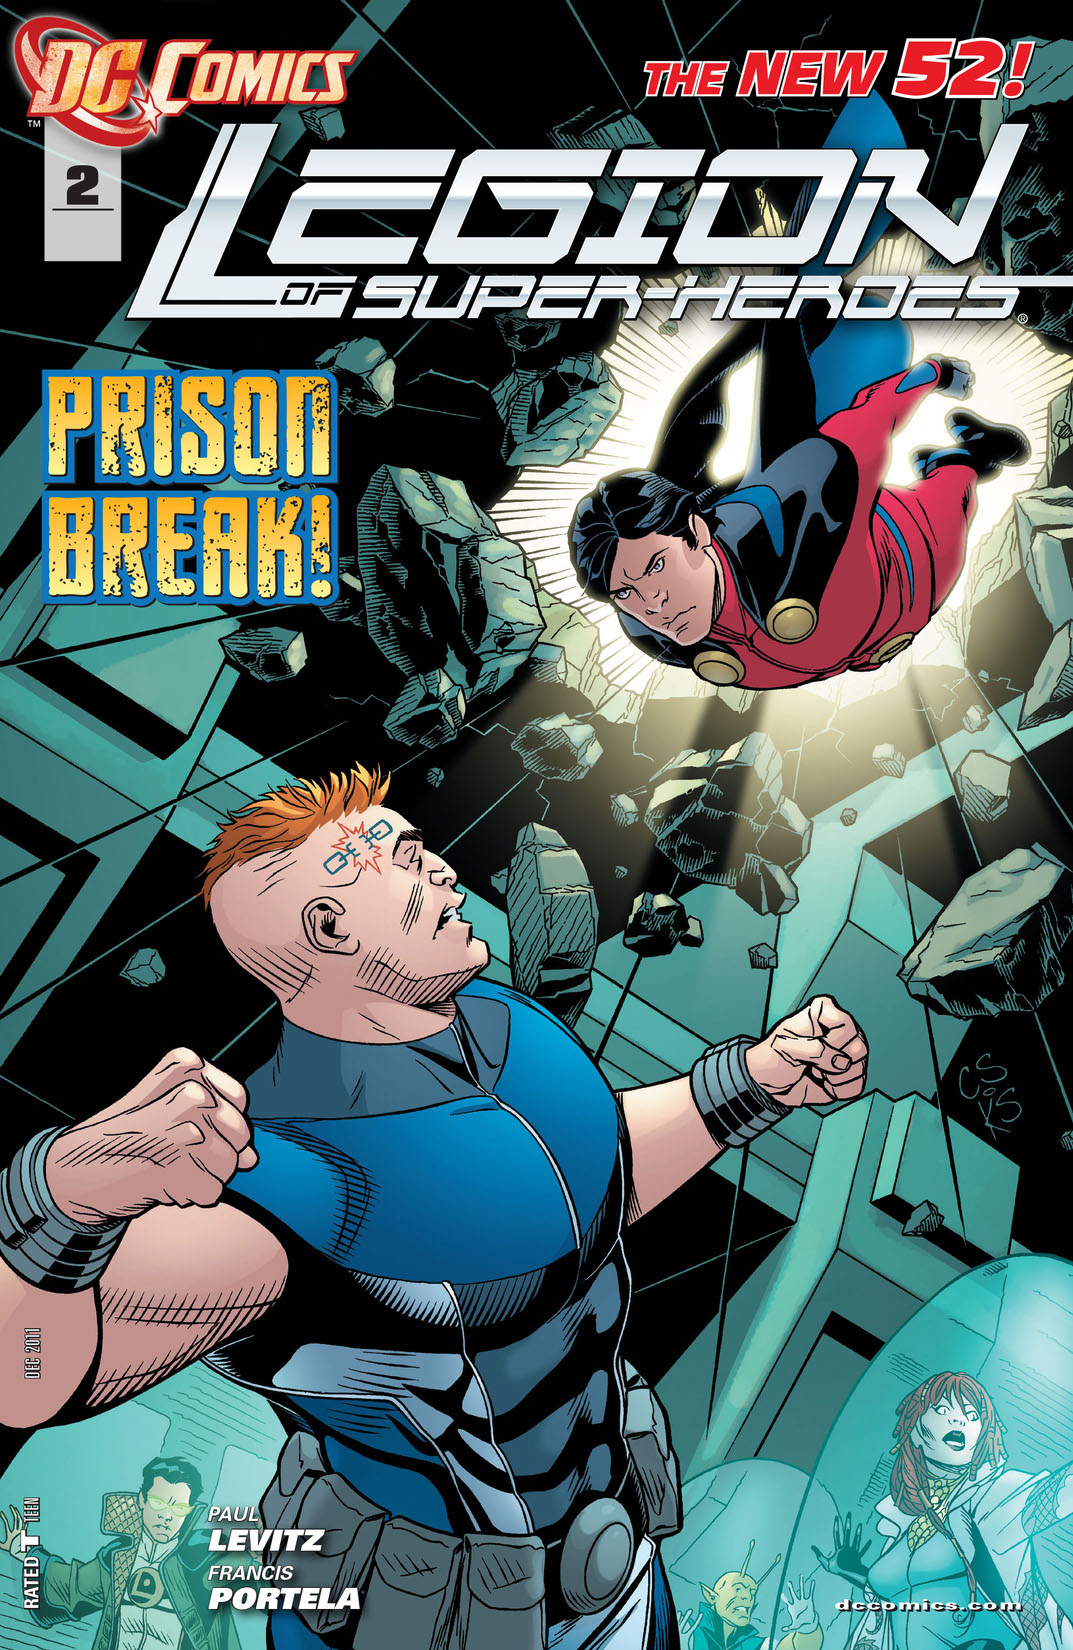 Legion of Super-Heroes (2011-) #2 preview images